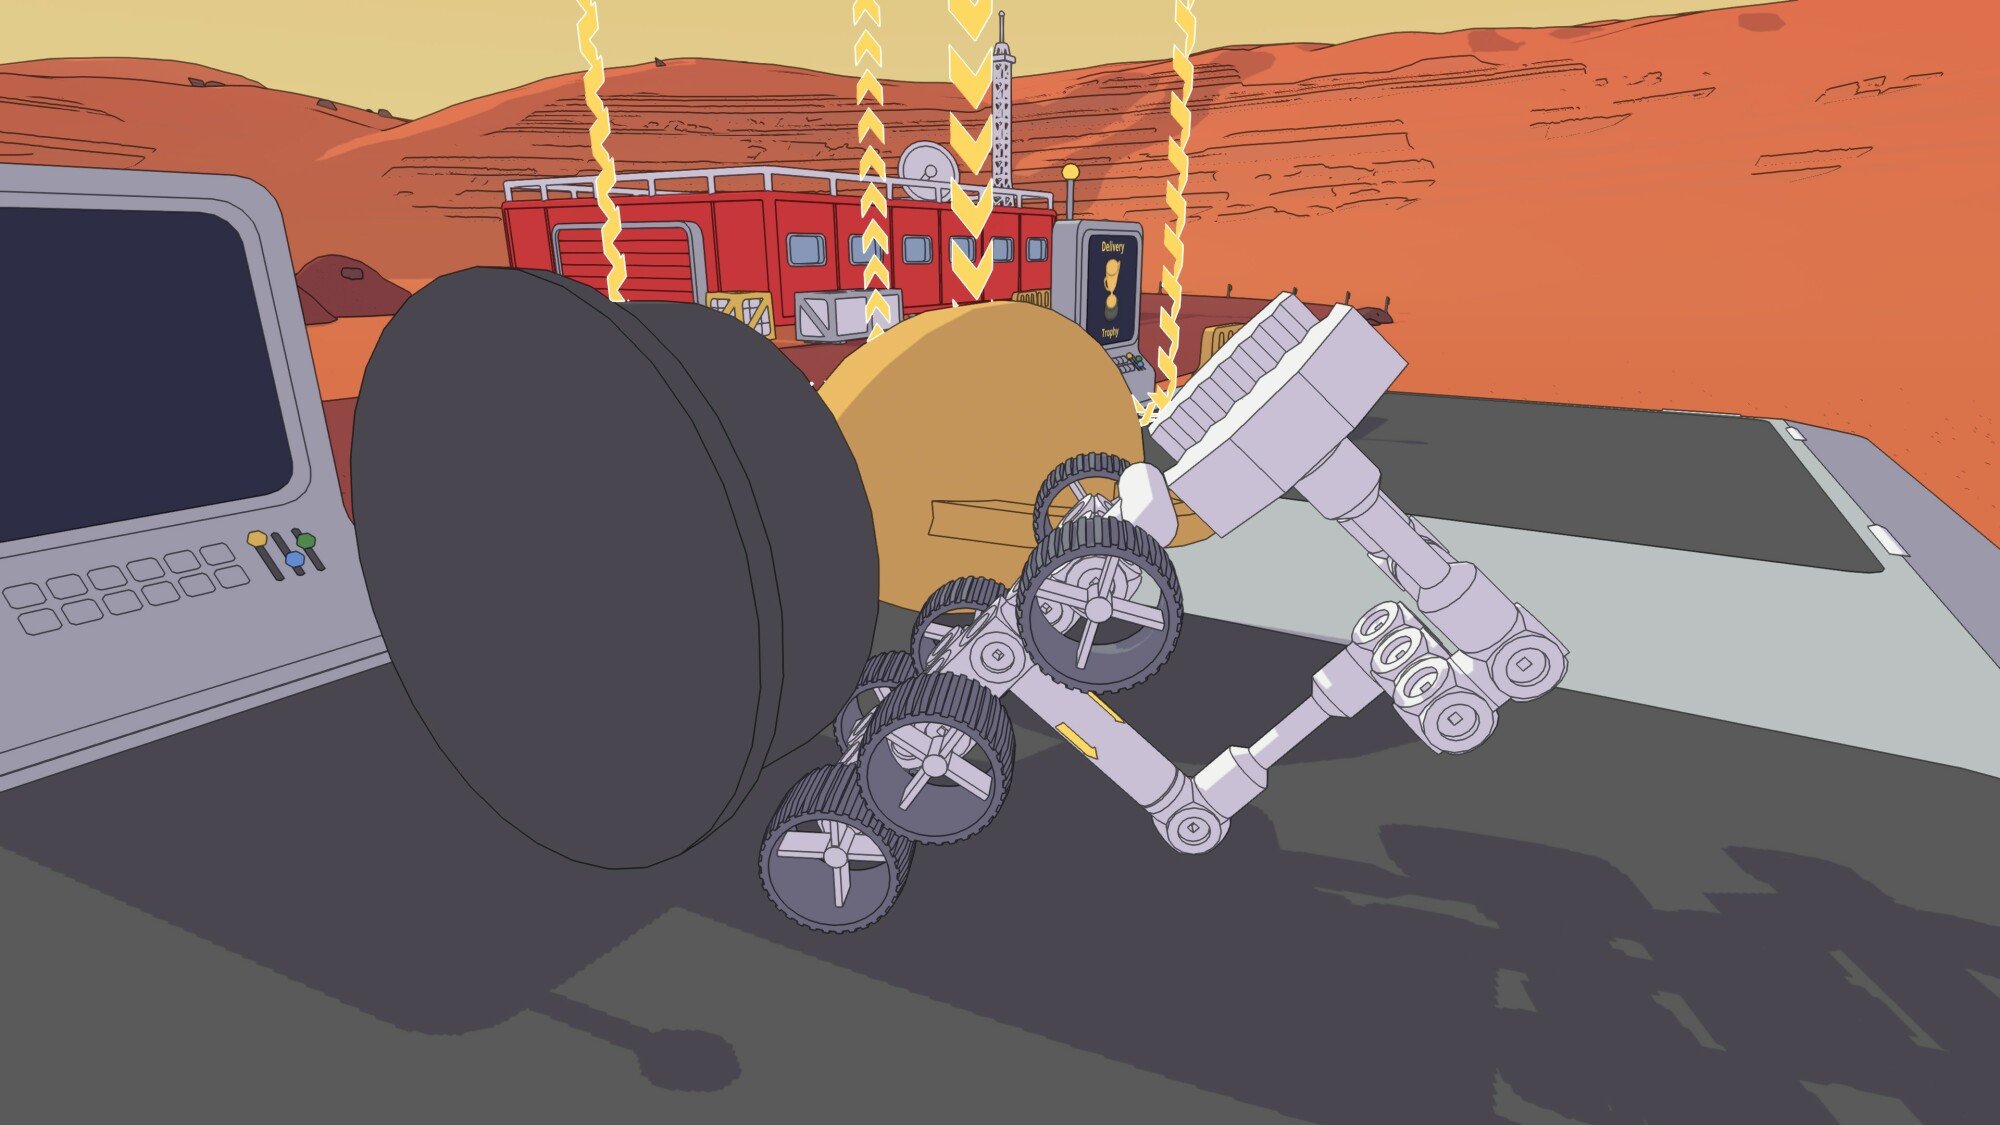 A Mars First Logistics screenshot. In it, a buggy fruitlessly tries to move a giant trophy into a gold rectangle signifying the delivery point.